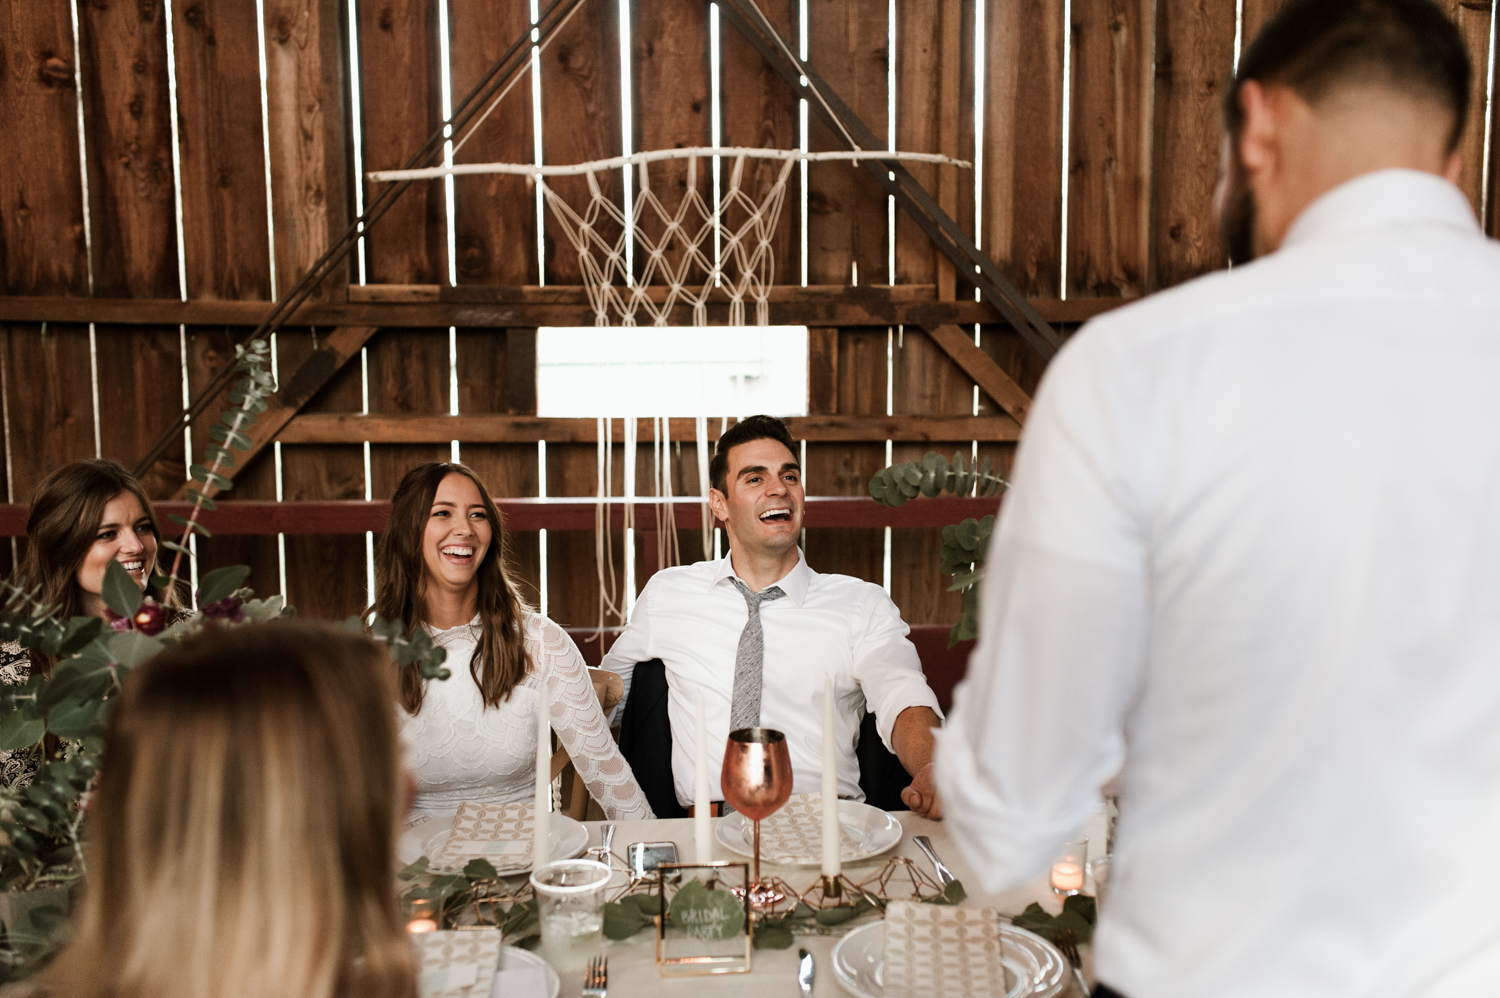 The bride and groom react happily to a toast given by the best man. By West Coast wedding photographer Briana Morrison